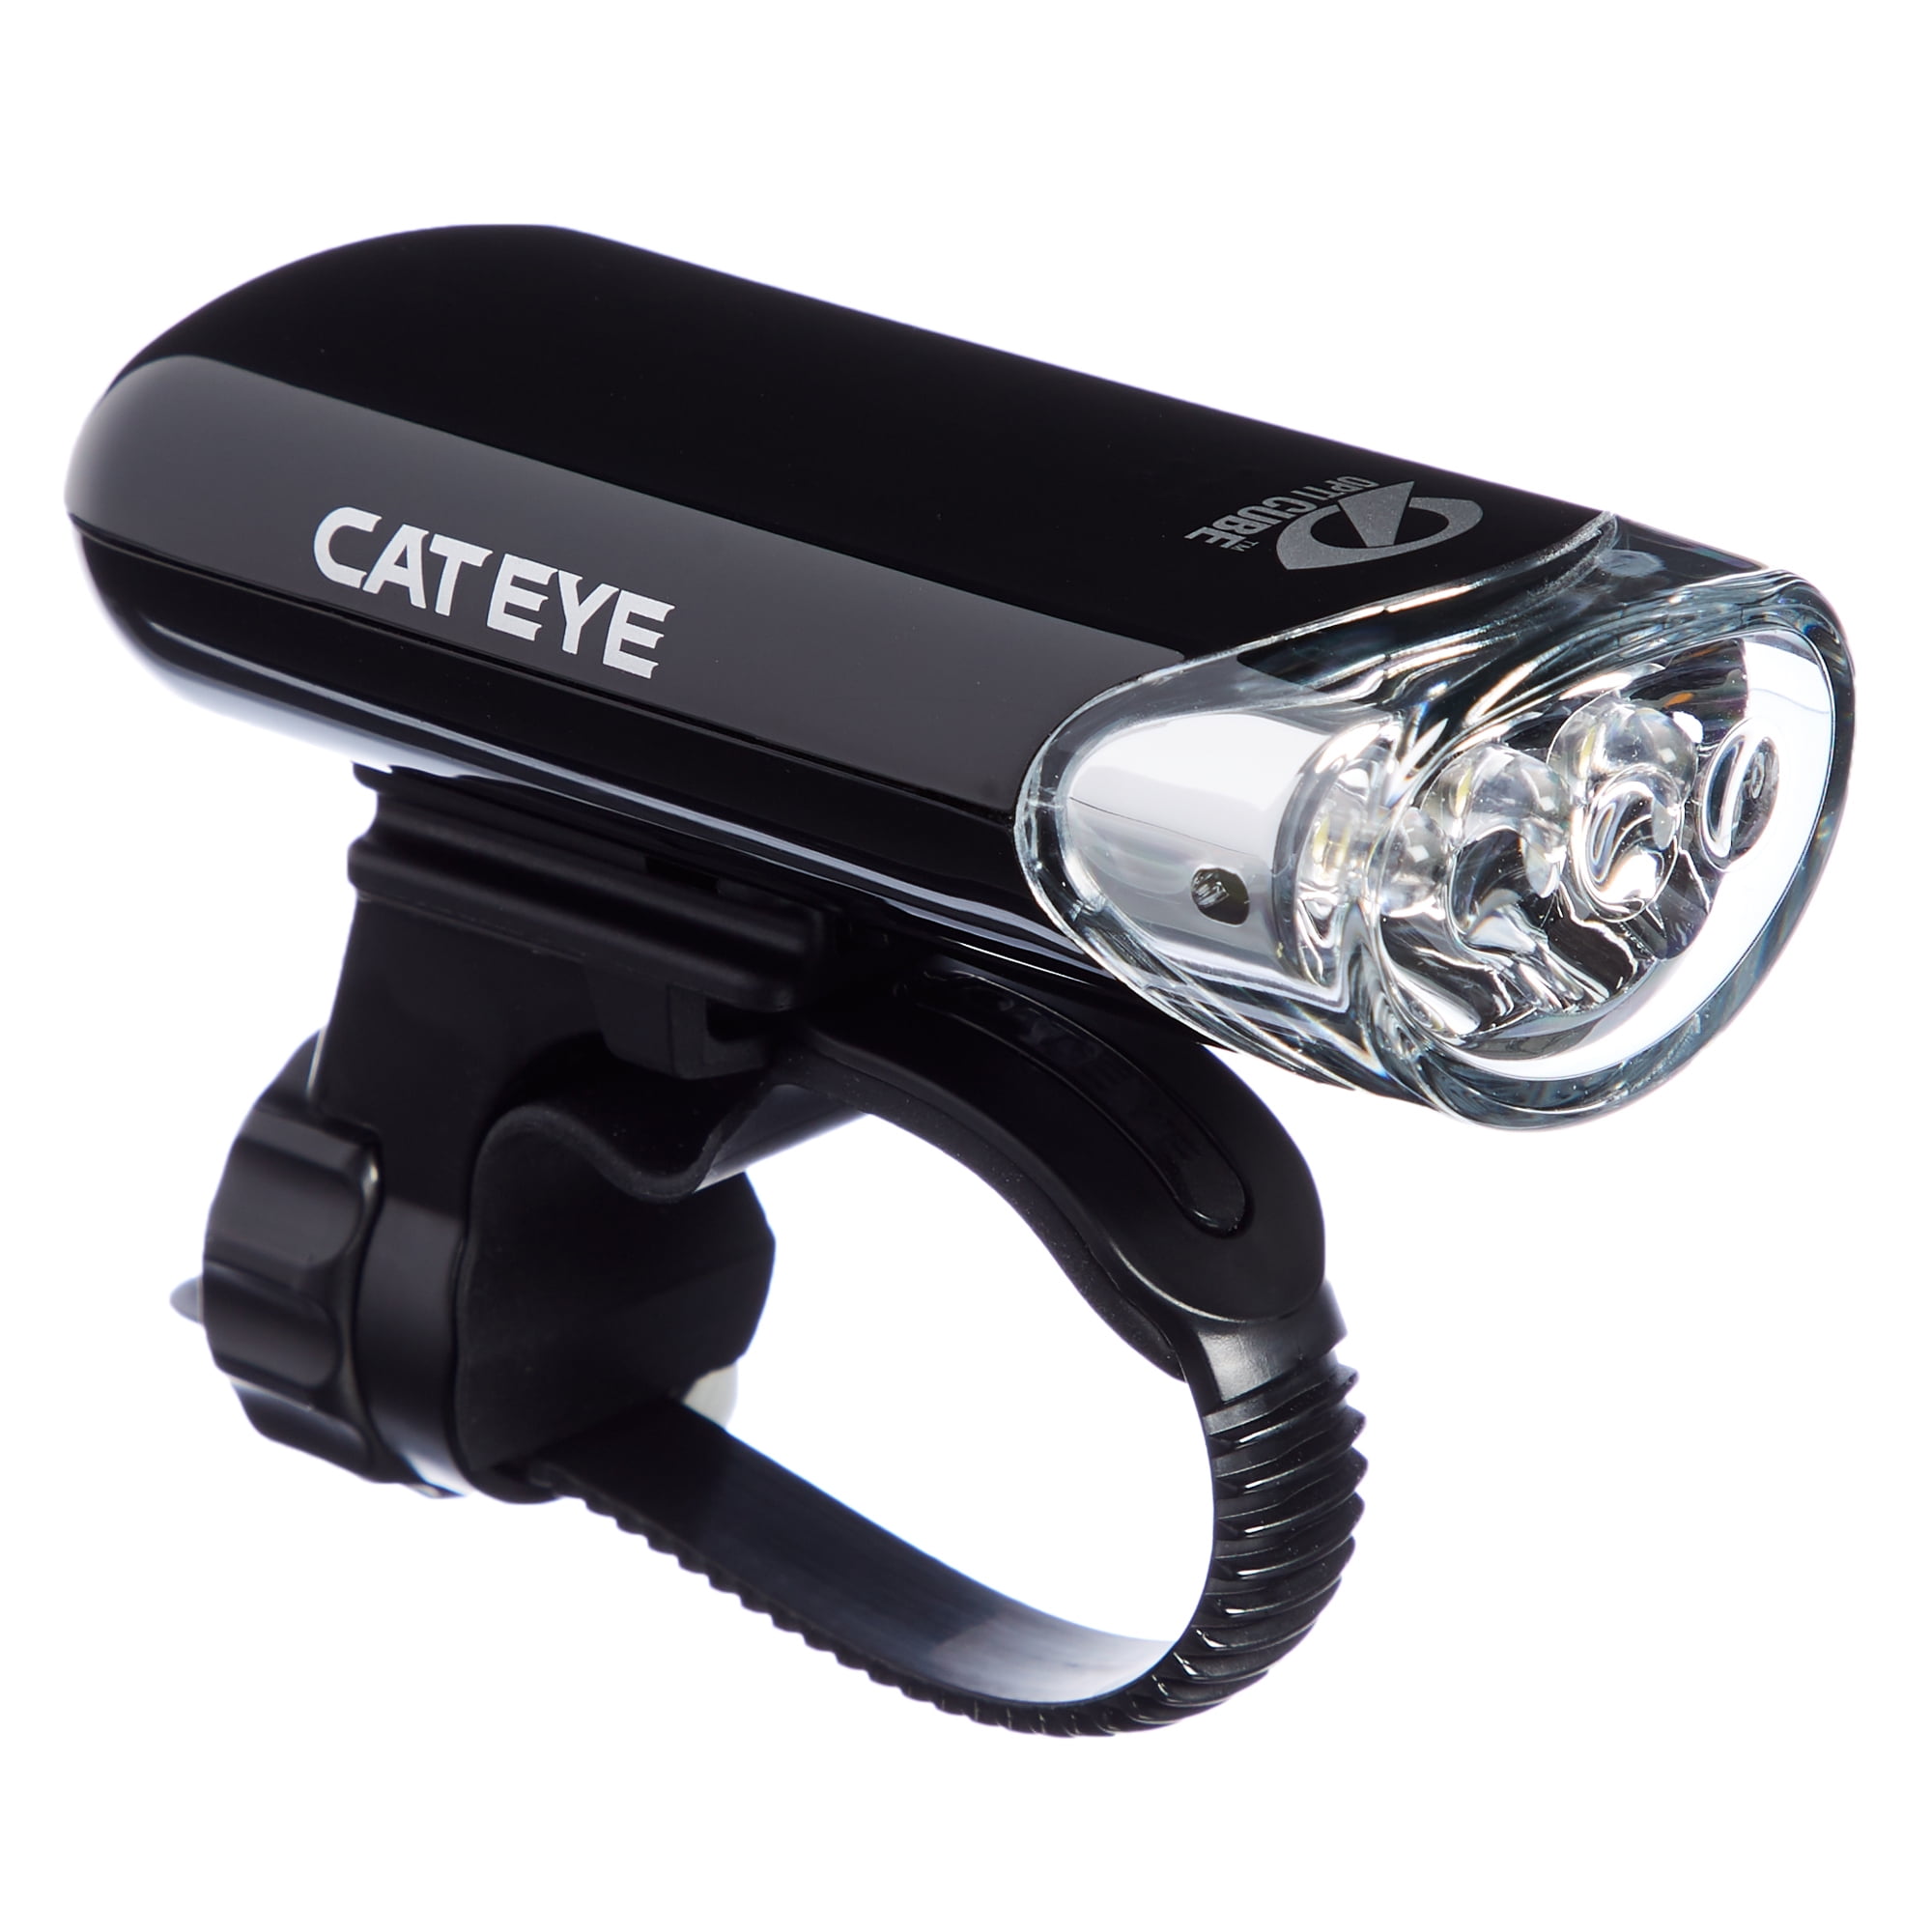 CatEye Omni 3 3 LED Bicycle Front and Rear Safety Lightset for sale online 